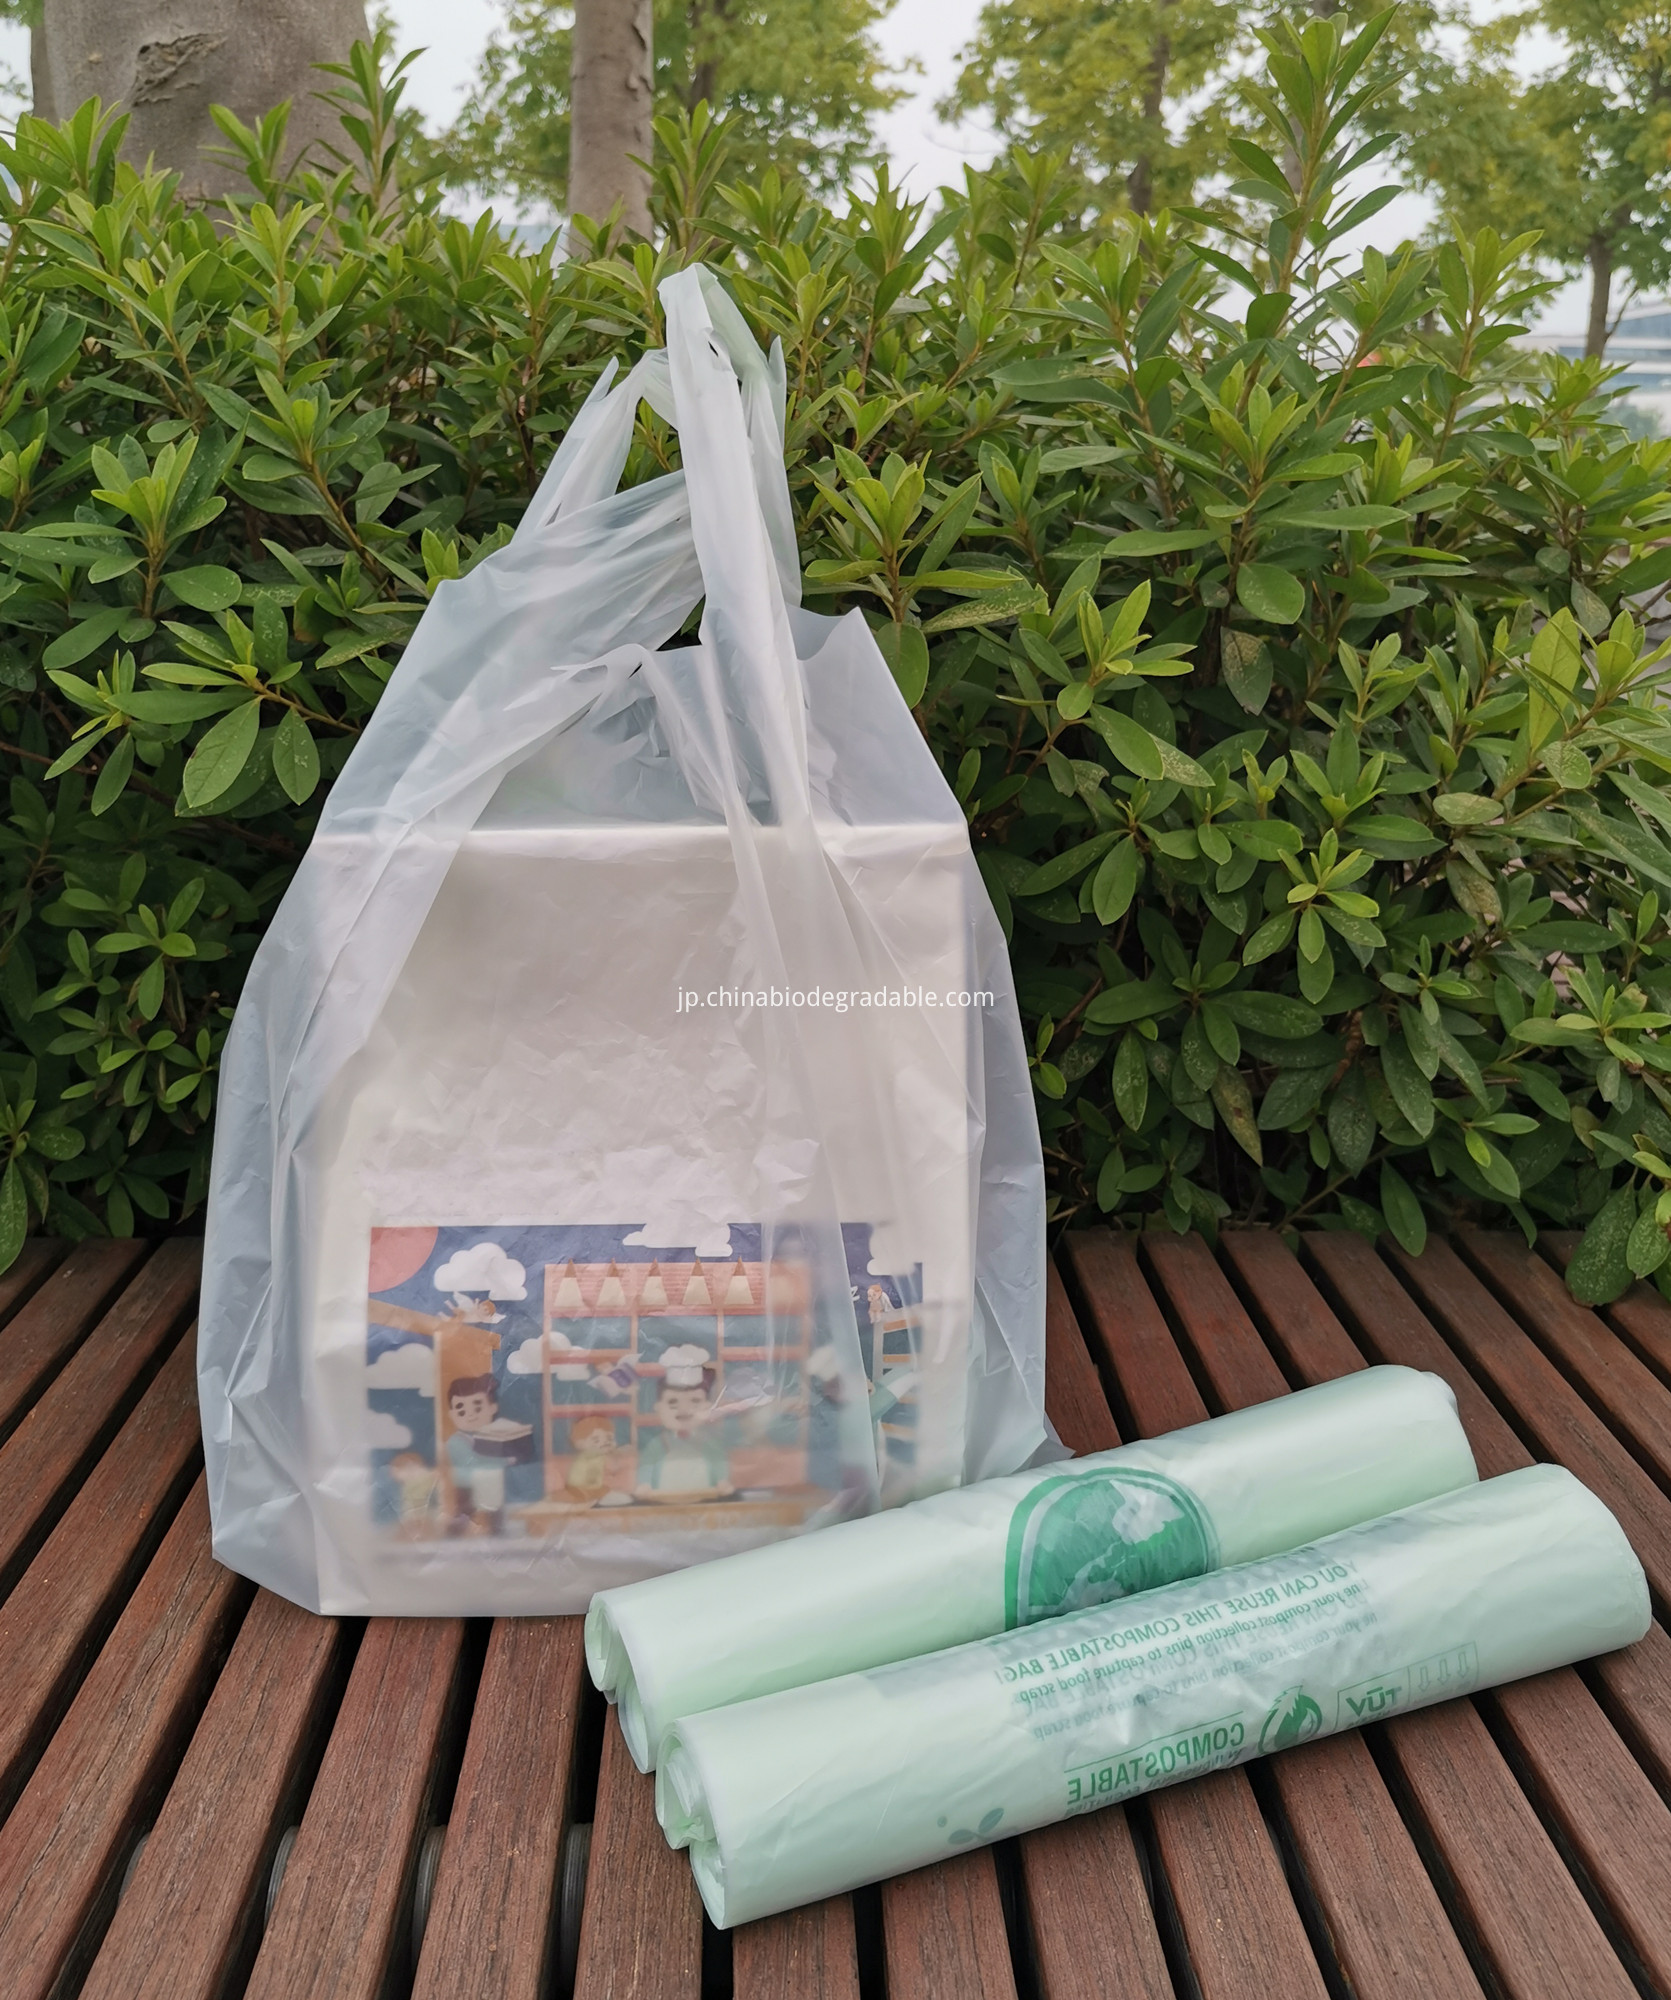 compostable shopping bags